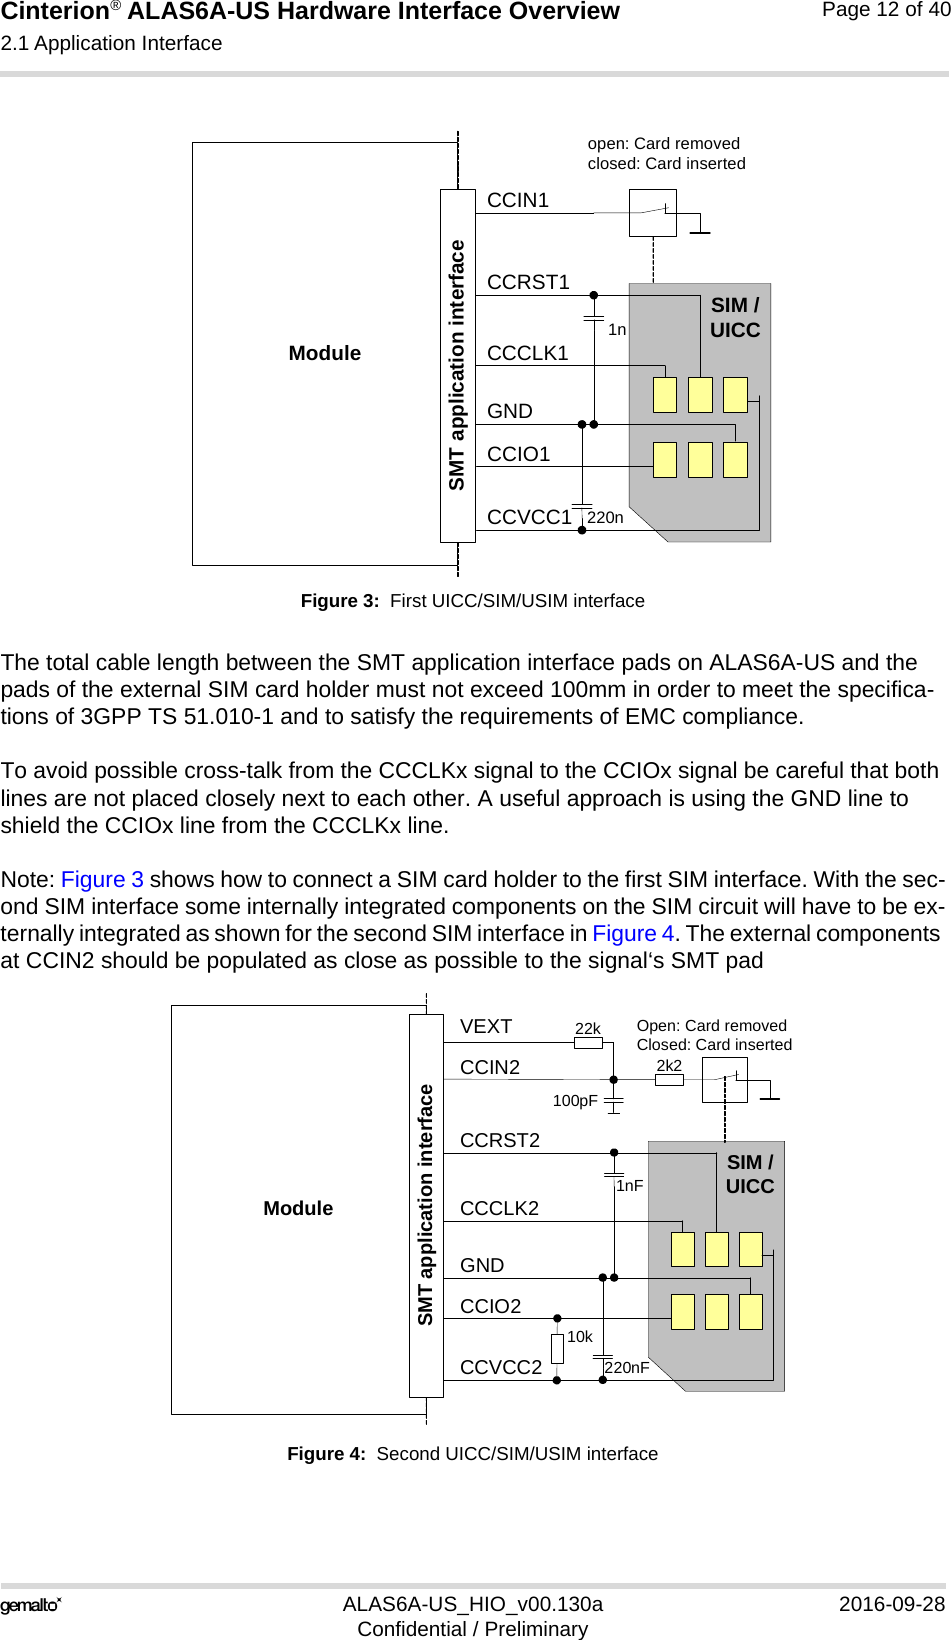 Cinterion® ALAS6A-US Hardware Interface Overview2.1 Application Interface22ALAS6A-US_HIO_v00.130a 2016-09-28Confidential / PreliminaryPage 12 of 40Figure 3:  First UICC/SIM/USIM interfaceThe total cable length between the SMT application interface pads on ALAS6A-US and the pads of the external SIM card holder must not exceed 100mm in order to meet the specifica-tions of 3GPP TS 51.010-1 and to satisfy the requirements of EMC compliance.To avoid possible cross-talk from the CCCLKx signal to the CCIOx signal be careful that both lines are not placed closely next to each other. A useful approach is using the GND line to shield the CCIOx line from the CCCLKx line.Note: Figure 3 shows how to connect a SIM card holder to the first SIM interface. With the sec-ond SIM interface some internally integrated components on the SIM circuit will have to be ex-ternally integrated as shown for the second SIM interface in Figure 4. The external components at CCIN2 should be populated as close as possible to the signal‘s SMT padFigure 4:  Second UICC/SIM/USIM interfaceModuleopen: Card removedclosed: Card insertedCCRST1CCVCC1CCIO1CCCLK1CCIN1SIM /UICC1n220nSMT application interfaceGNDModuleOpen: Card removedClosed: Card insertedCCRST2CCVCC2CCIO2CCCLK2CCIN2SIM /UICC1nF220nFSMT application interfaceGNDVEXT100pF22k2k210k